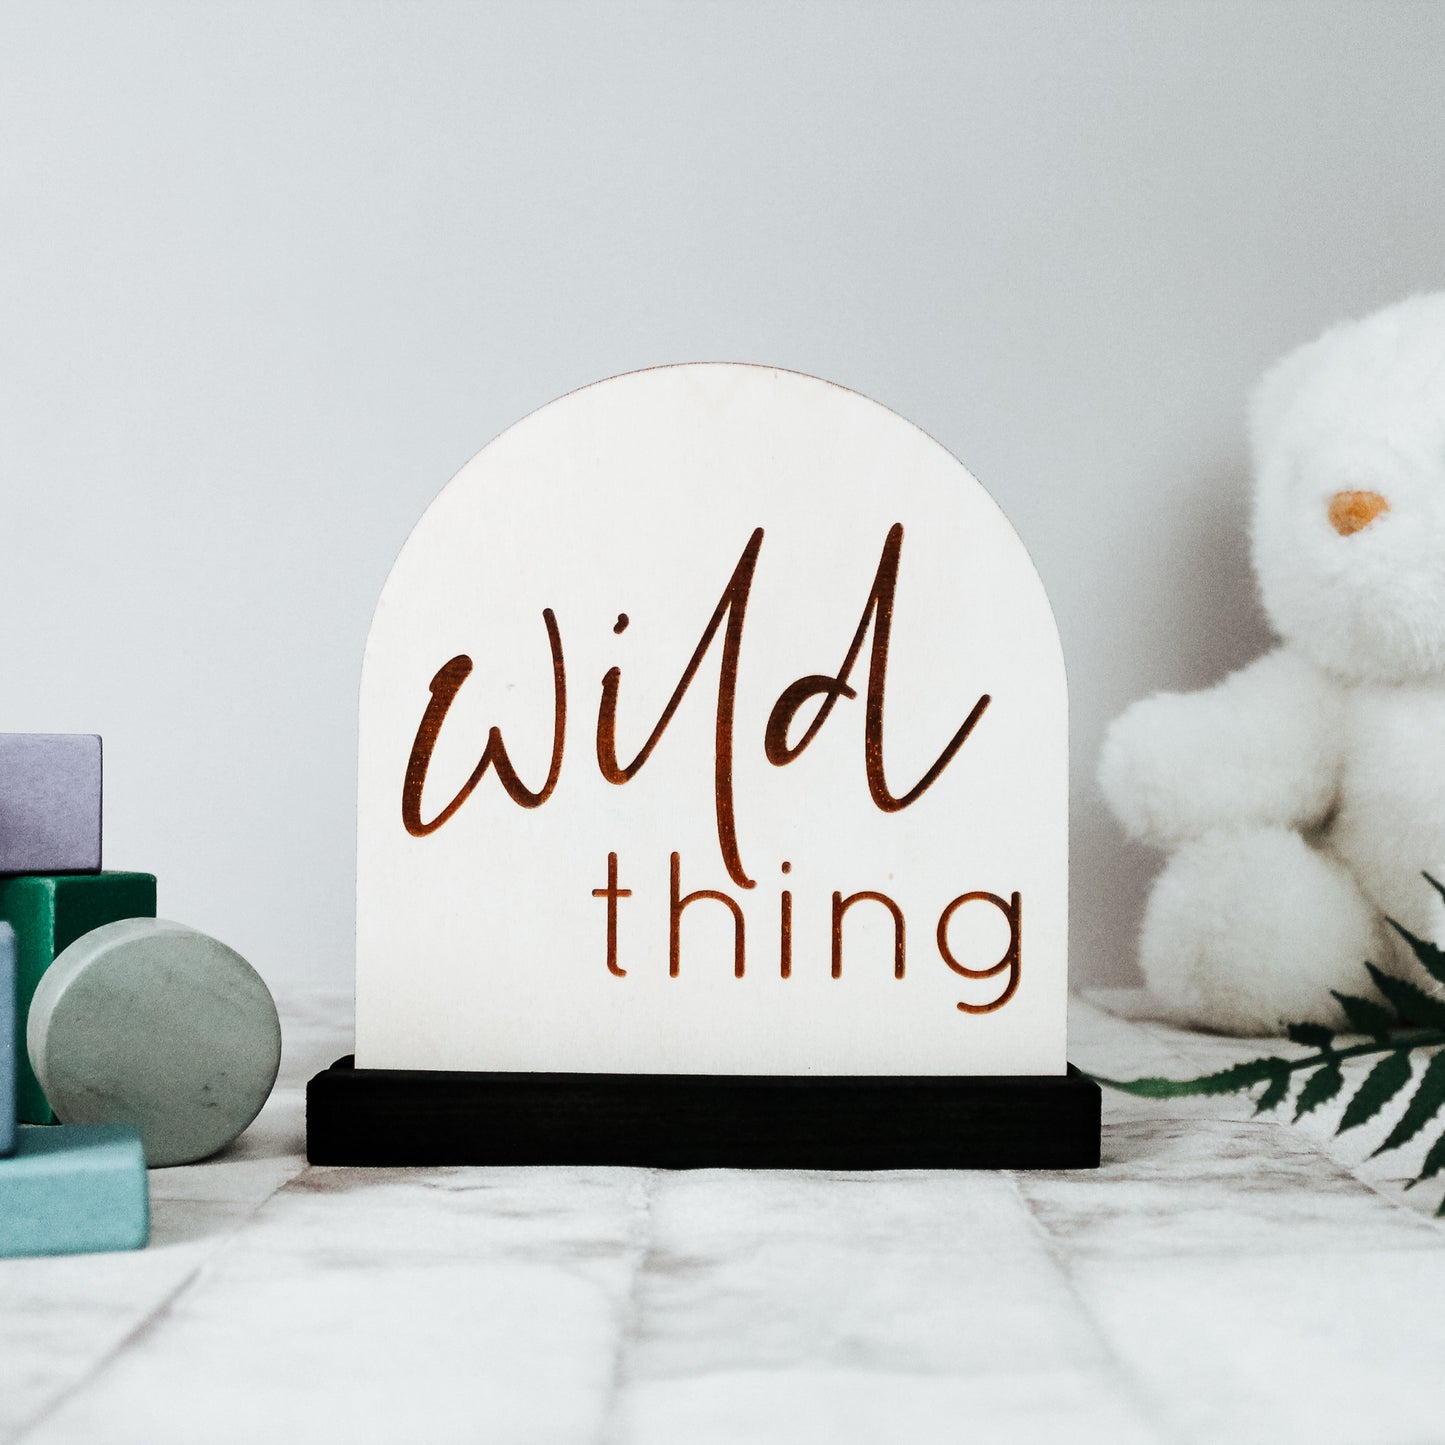 wild thing wooden engraved shelf sign for bookcase decor, playroom or nursery. Neutral colour palette for kids room